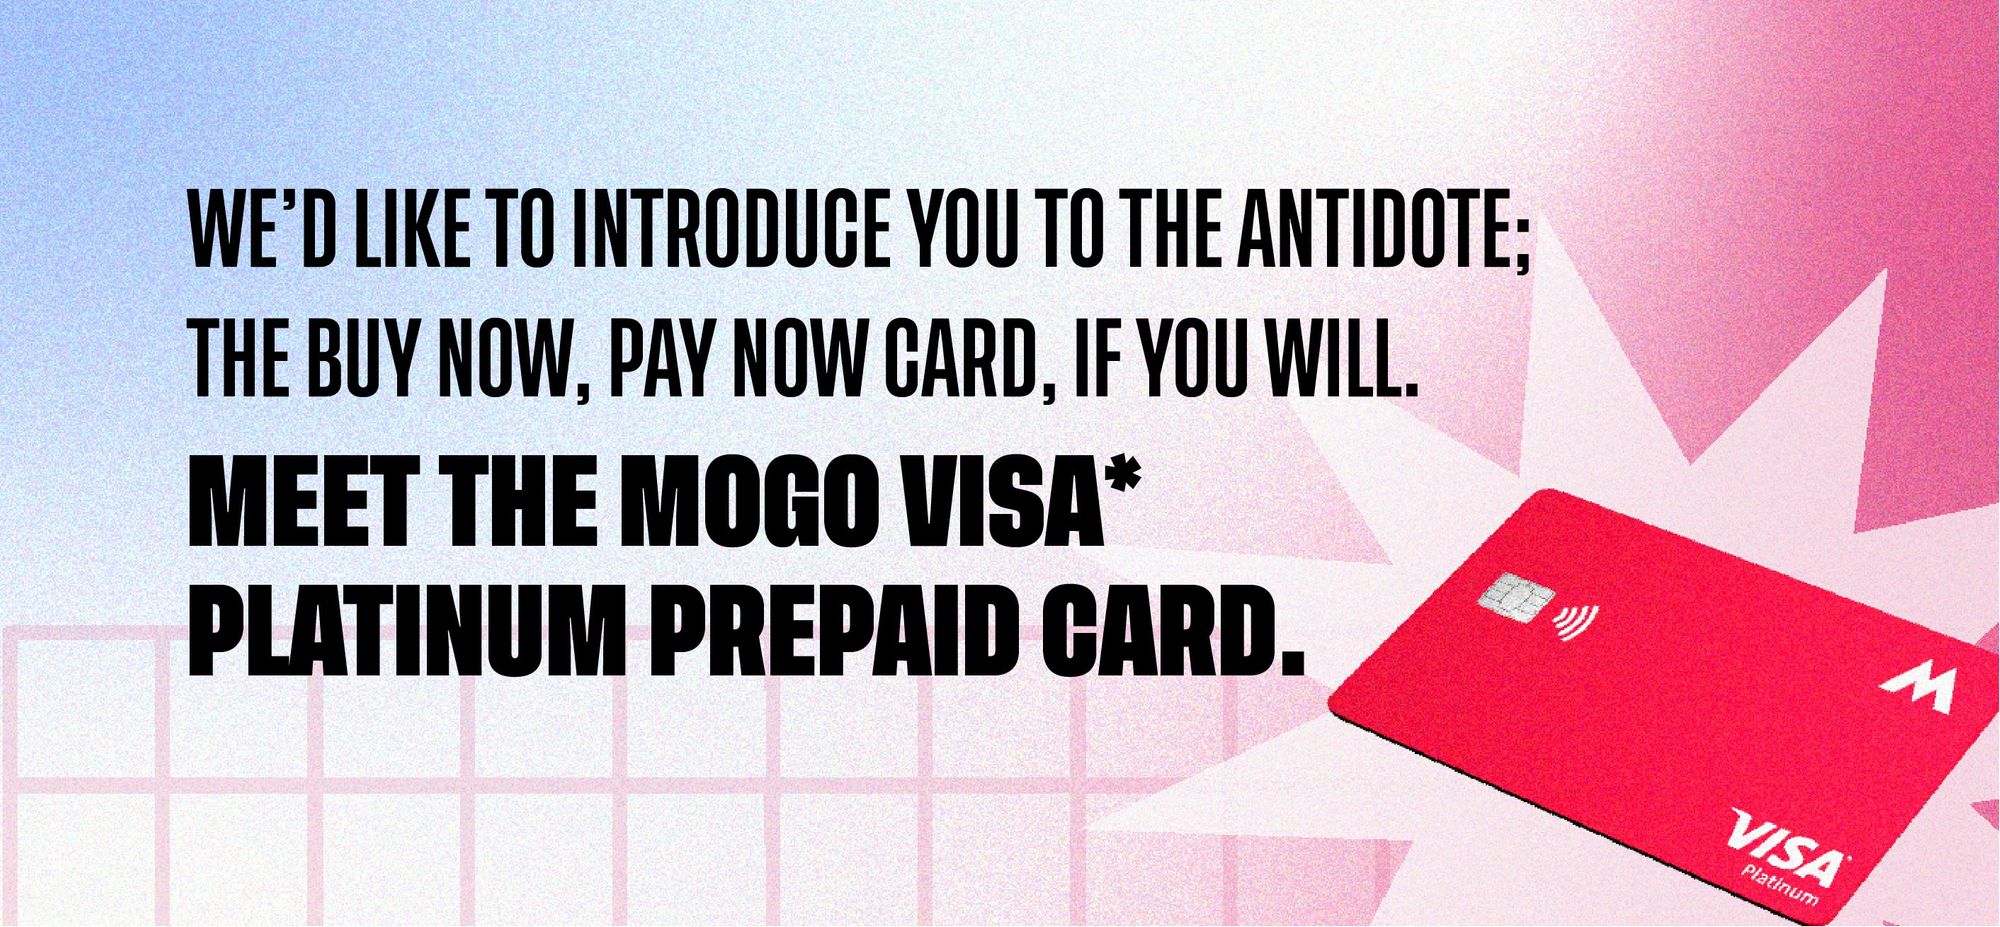 We'd like to introduce you to the antidote; The buy now, pay now card, if you will. Meet the Mogo Visa* Platinum Prepaid Card. 